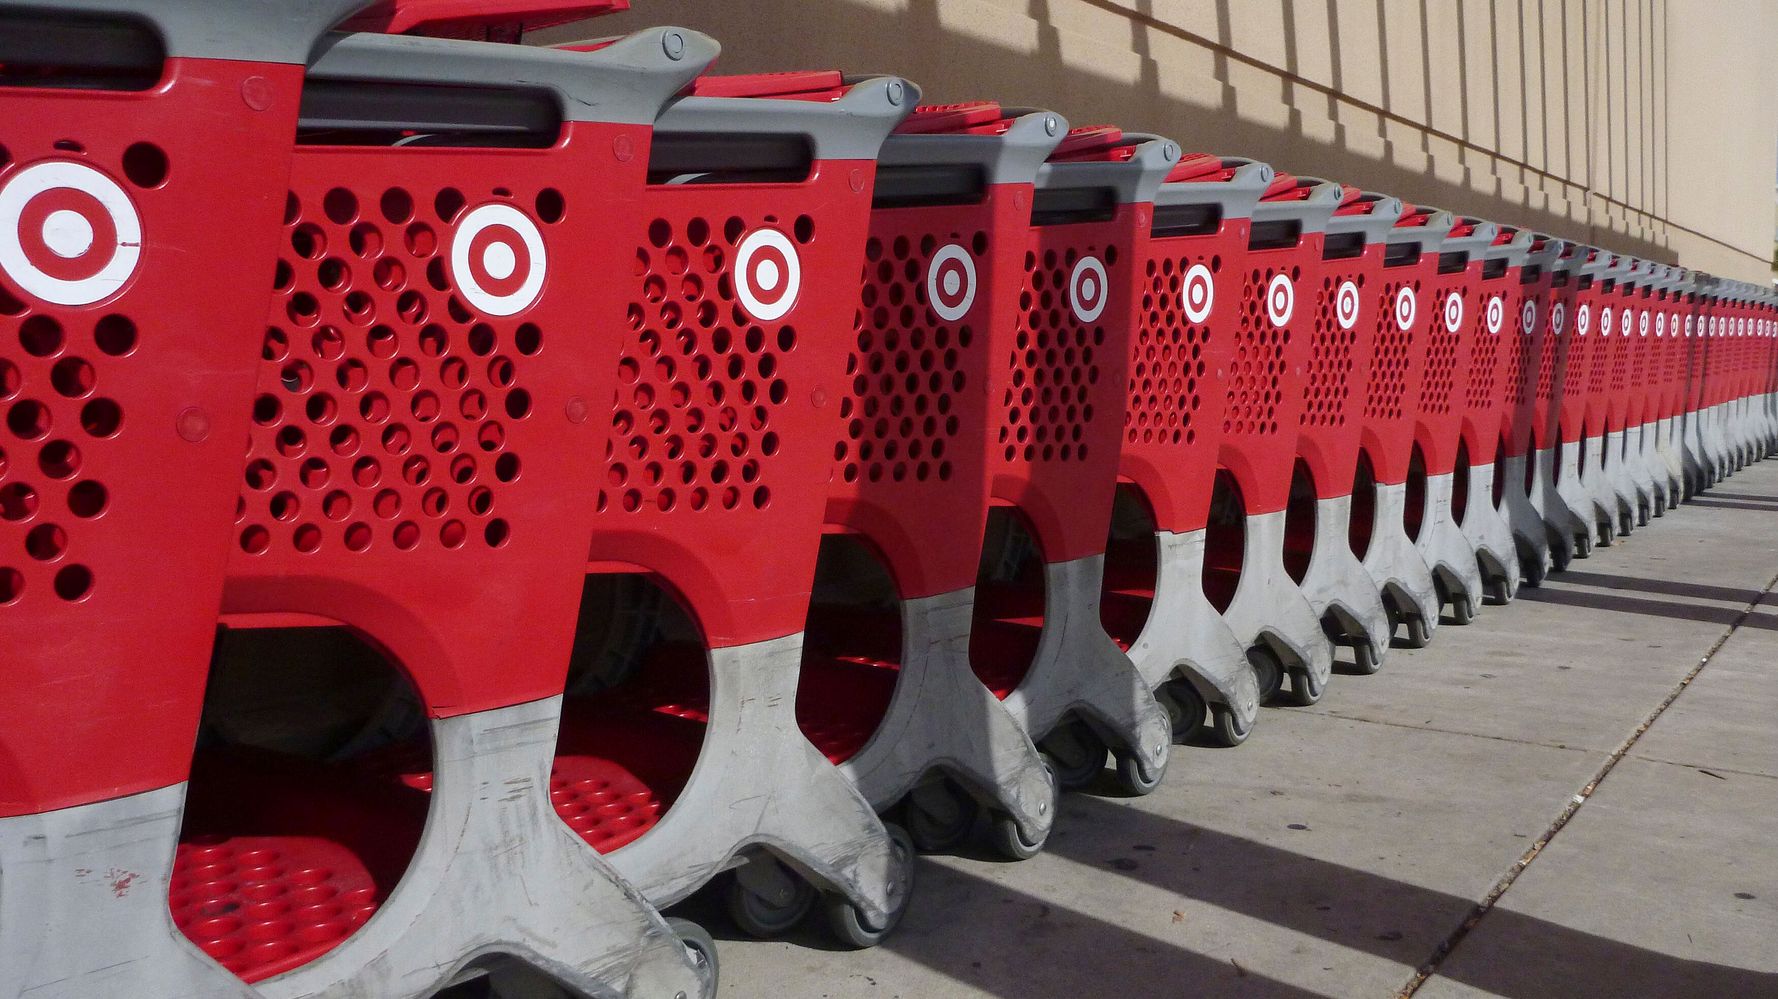 Target Black Friday Deals 2020: Everything You Need To Know